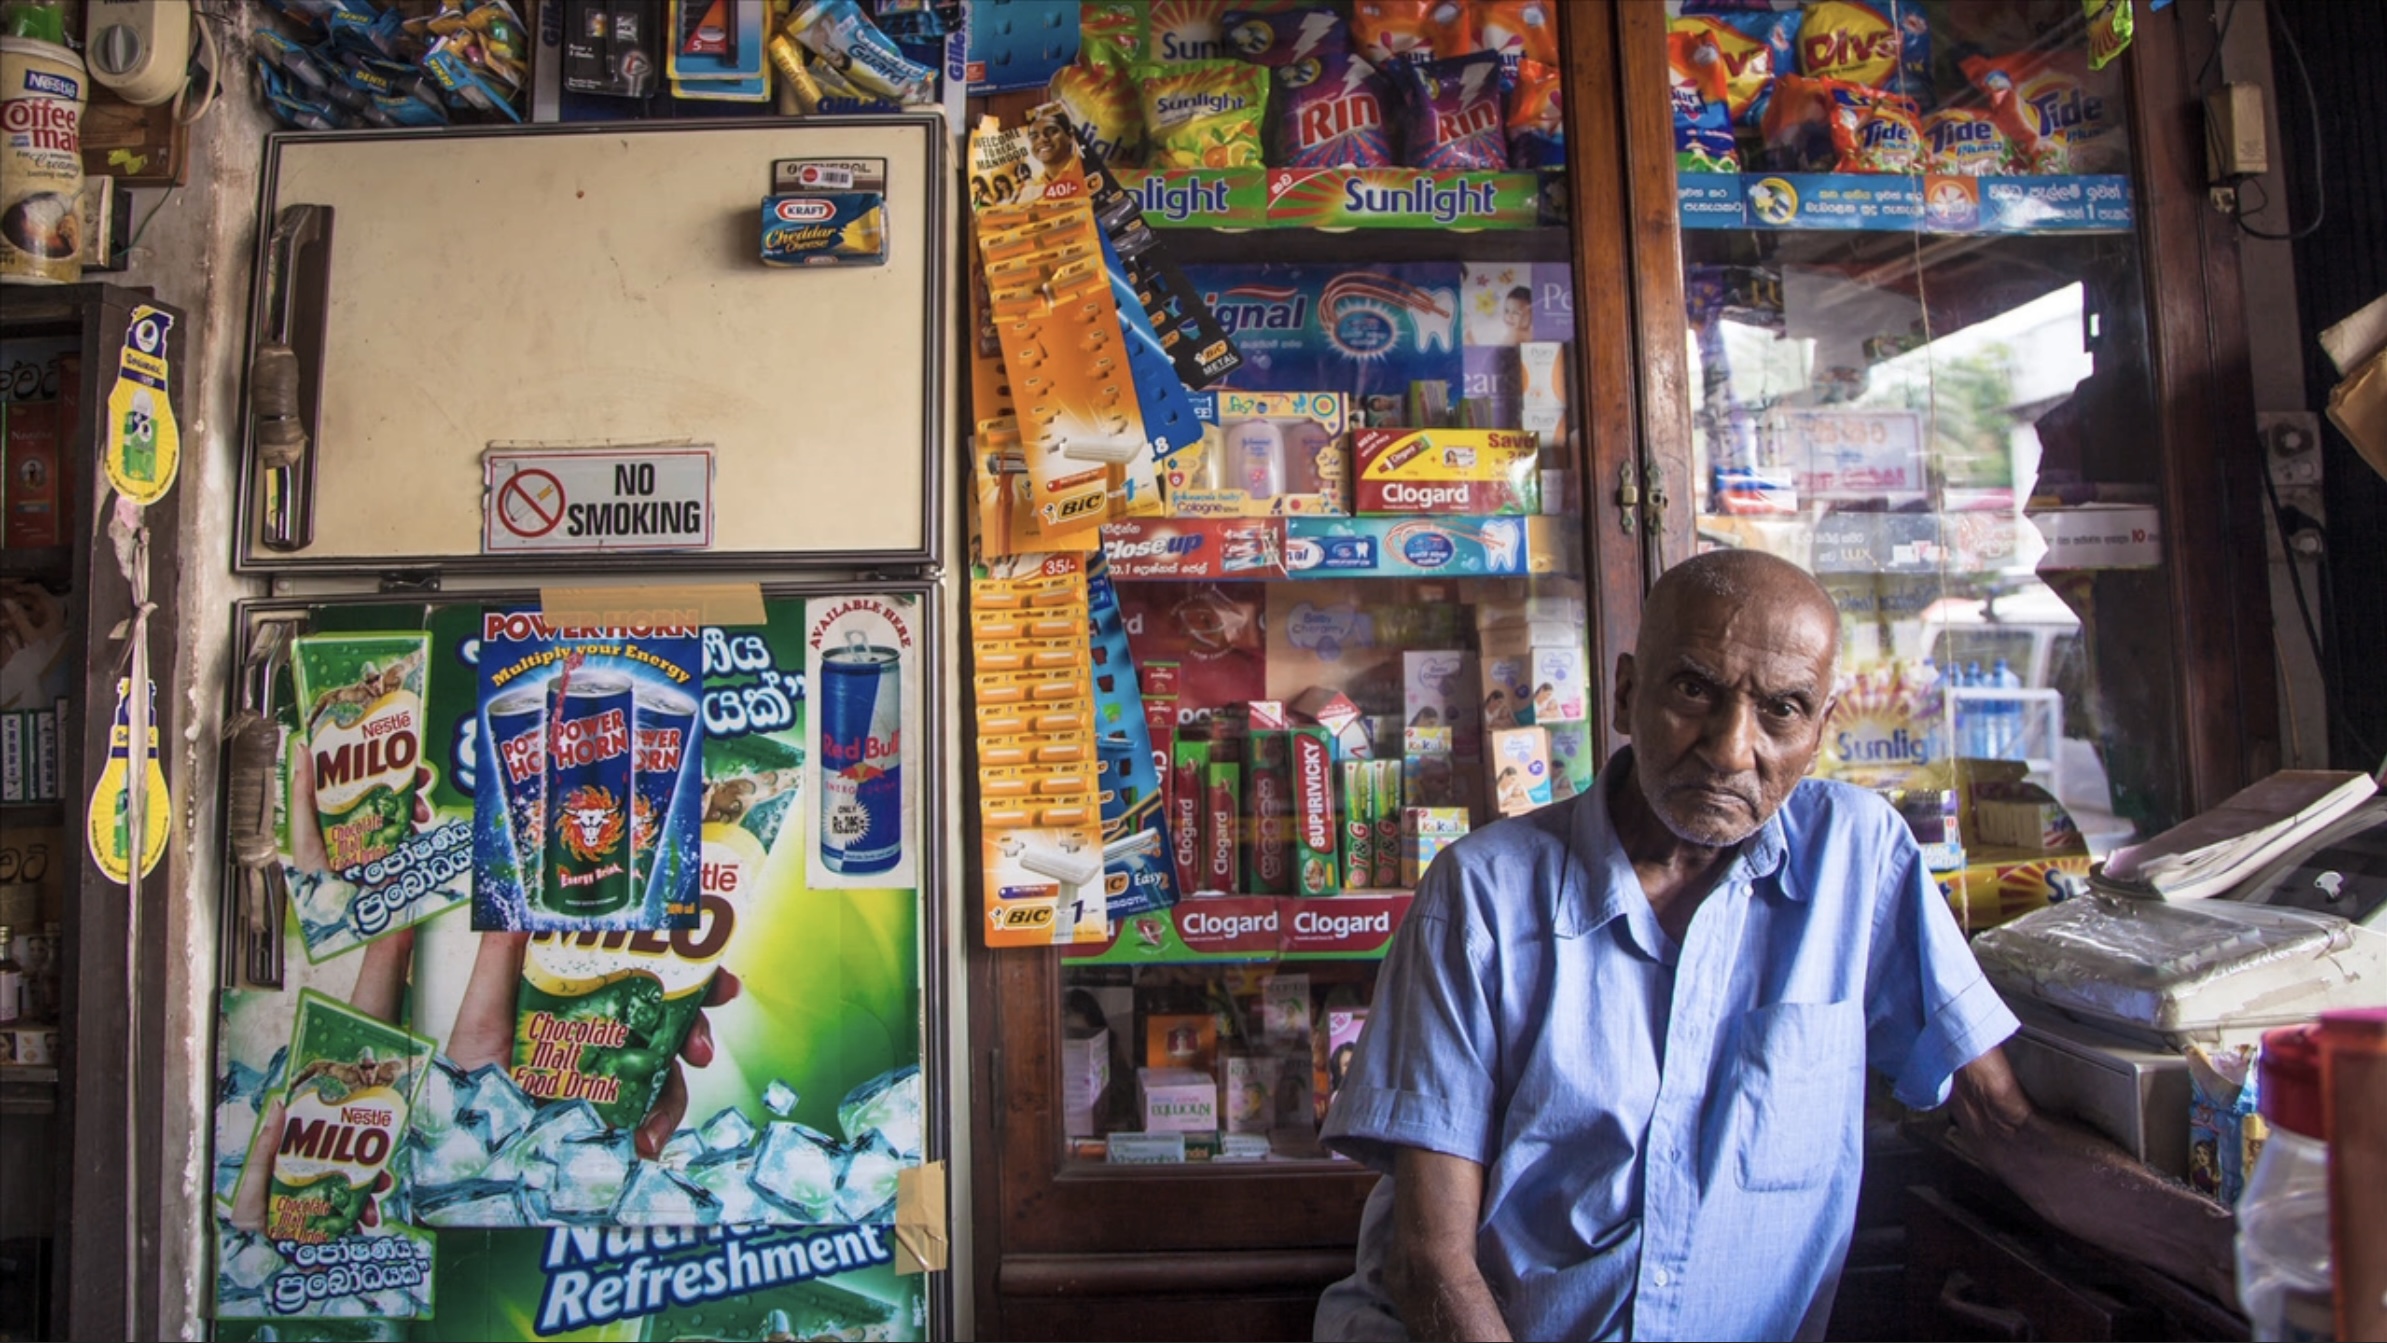 Lawrence Saravanamuttu’s grandfather Soosaipillai came to Negombo from his hometown of Jaffna to open the shop that would become famous for selling Jaffna cigars.